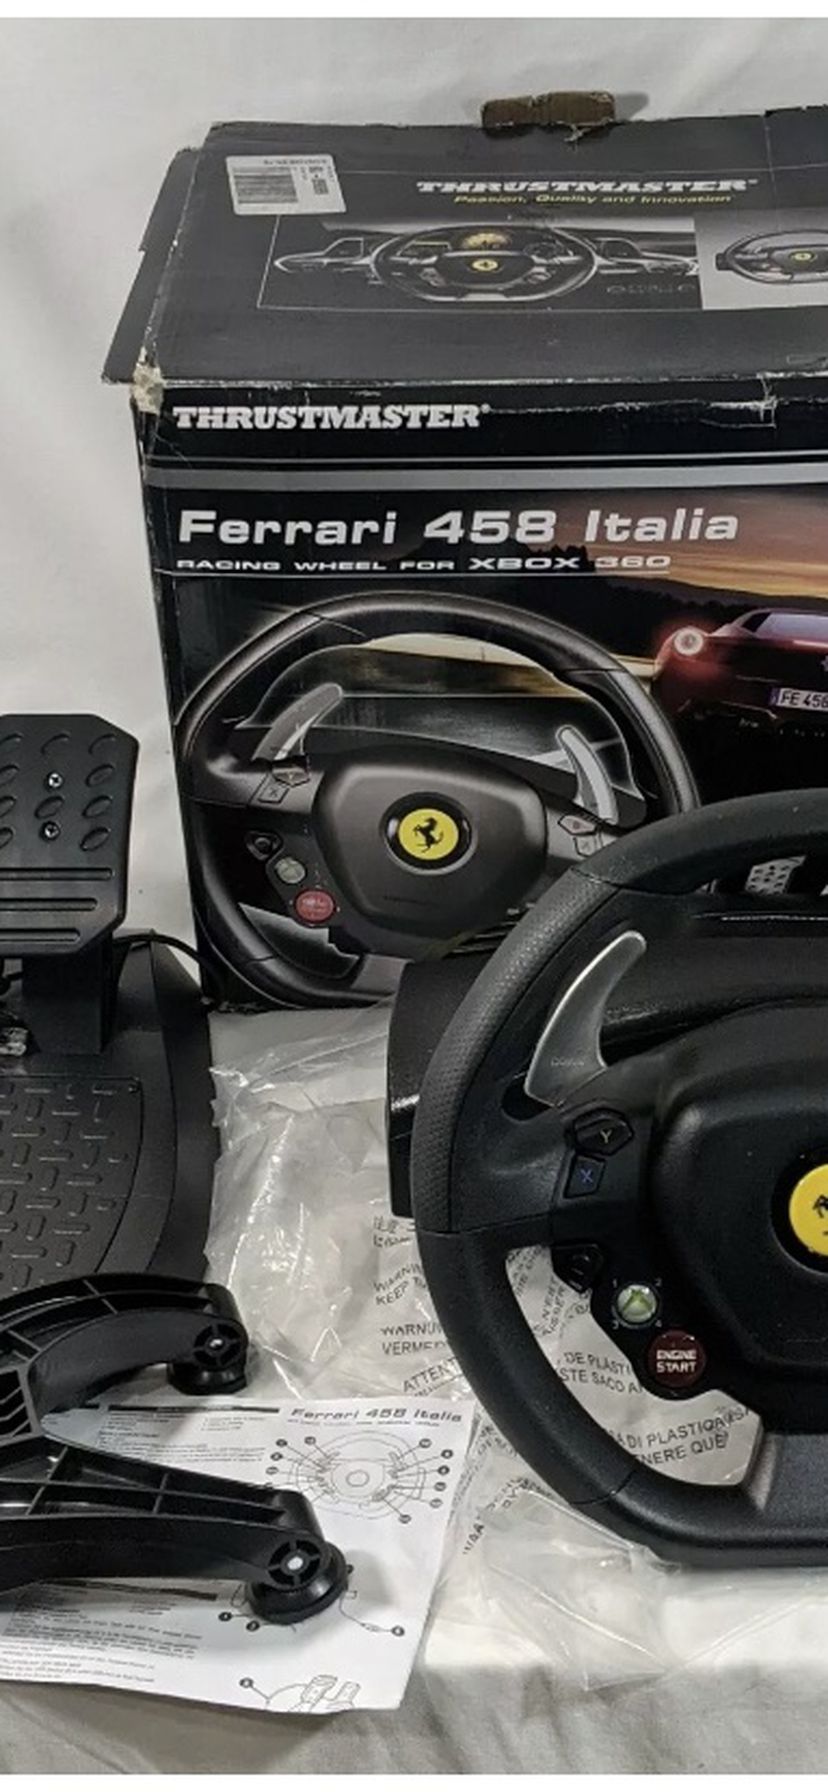 Ferrari Racing Wheel And Pedals for Xbox 360